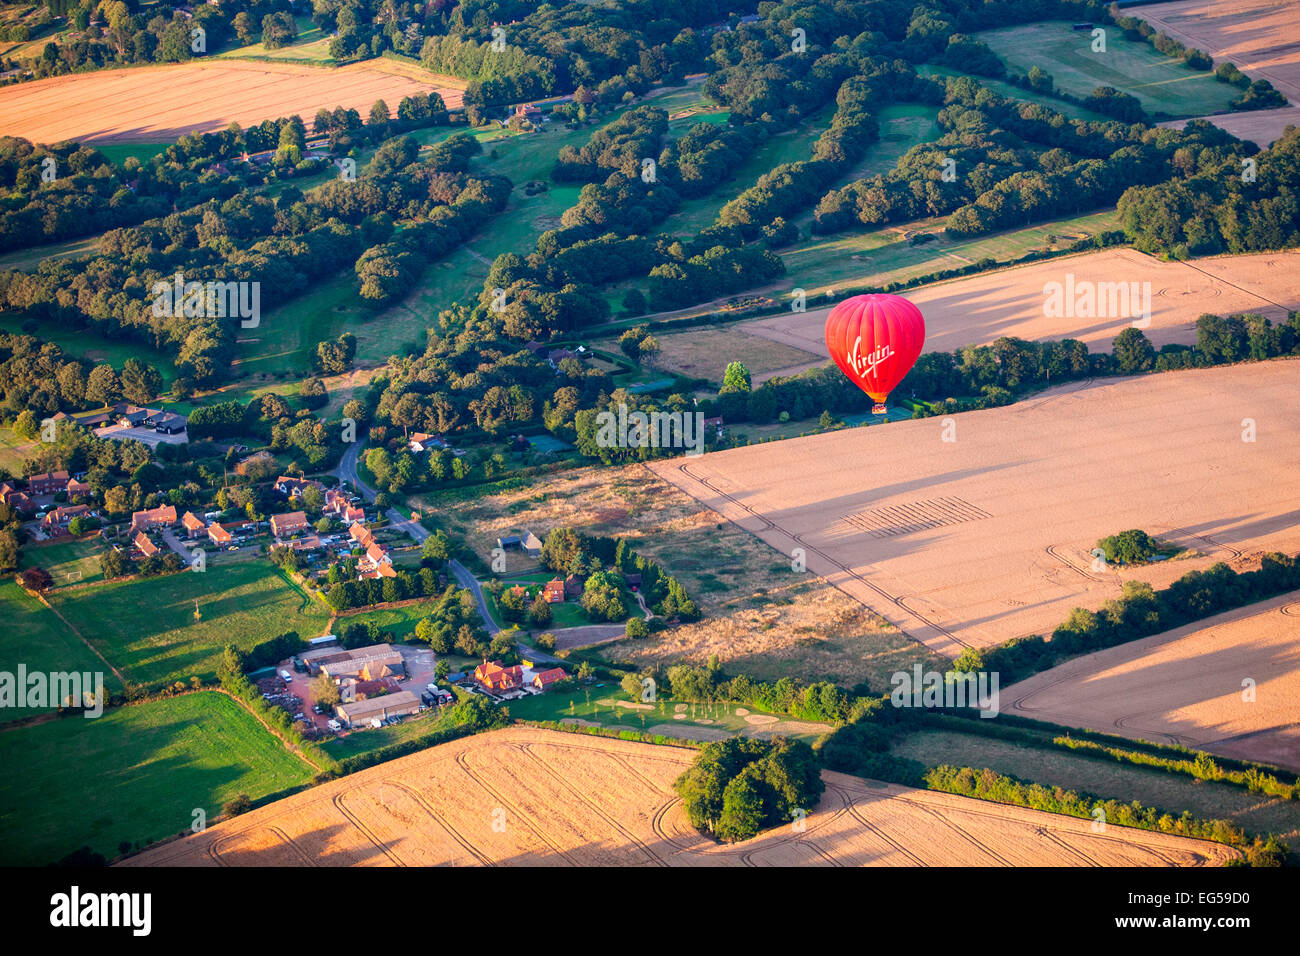 Aerial view of red hot air balloon flying over rural landscape, South Oxfordshire, England Stock Photo